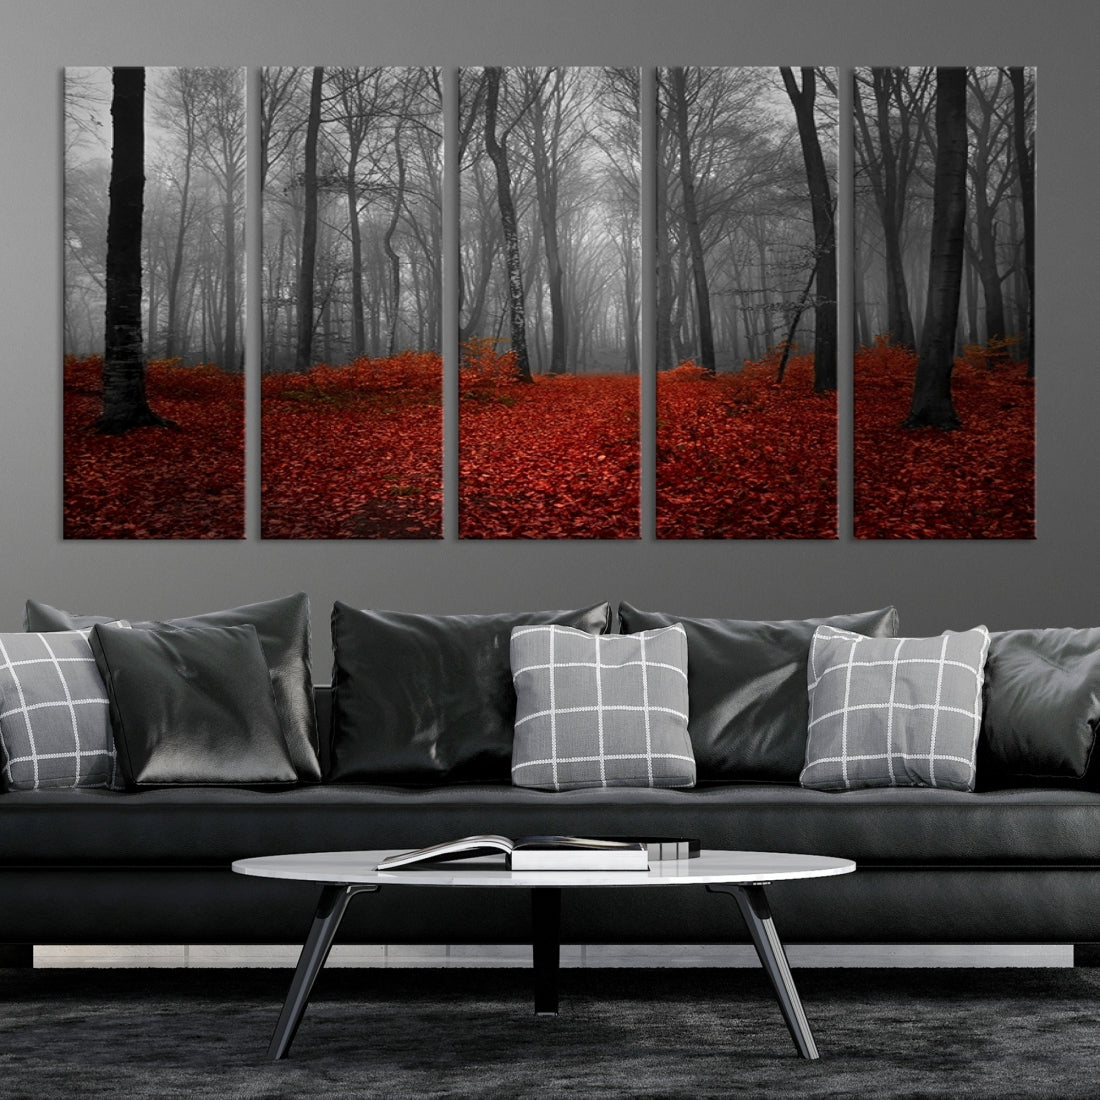 Foggy Forest with Red Leaves Autumn Landscape Giclee Canvas Extra Large Wall Art Print